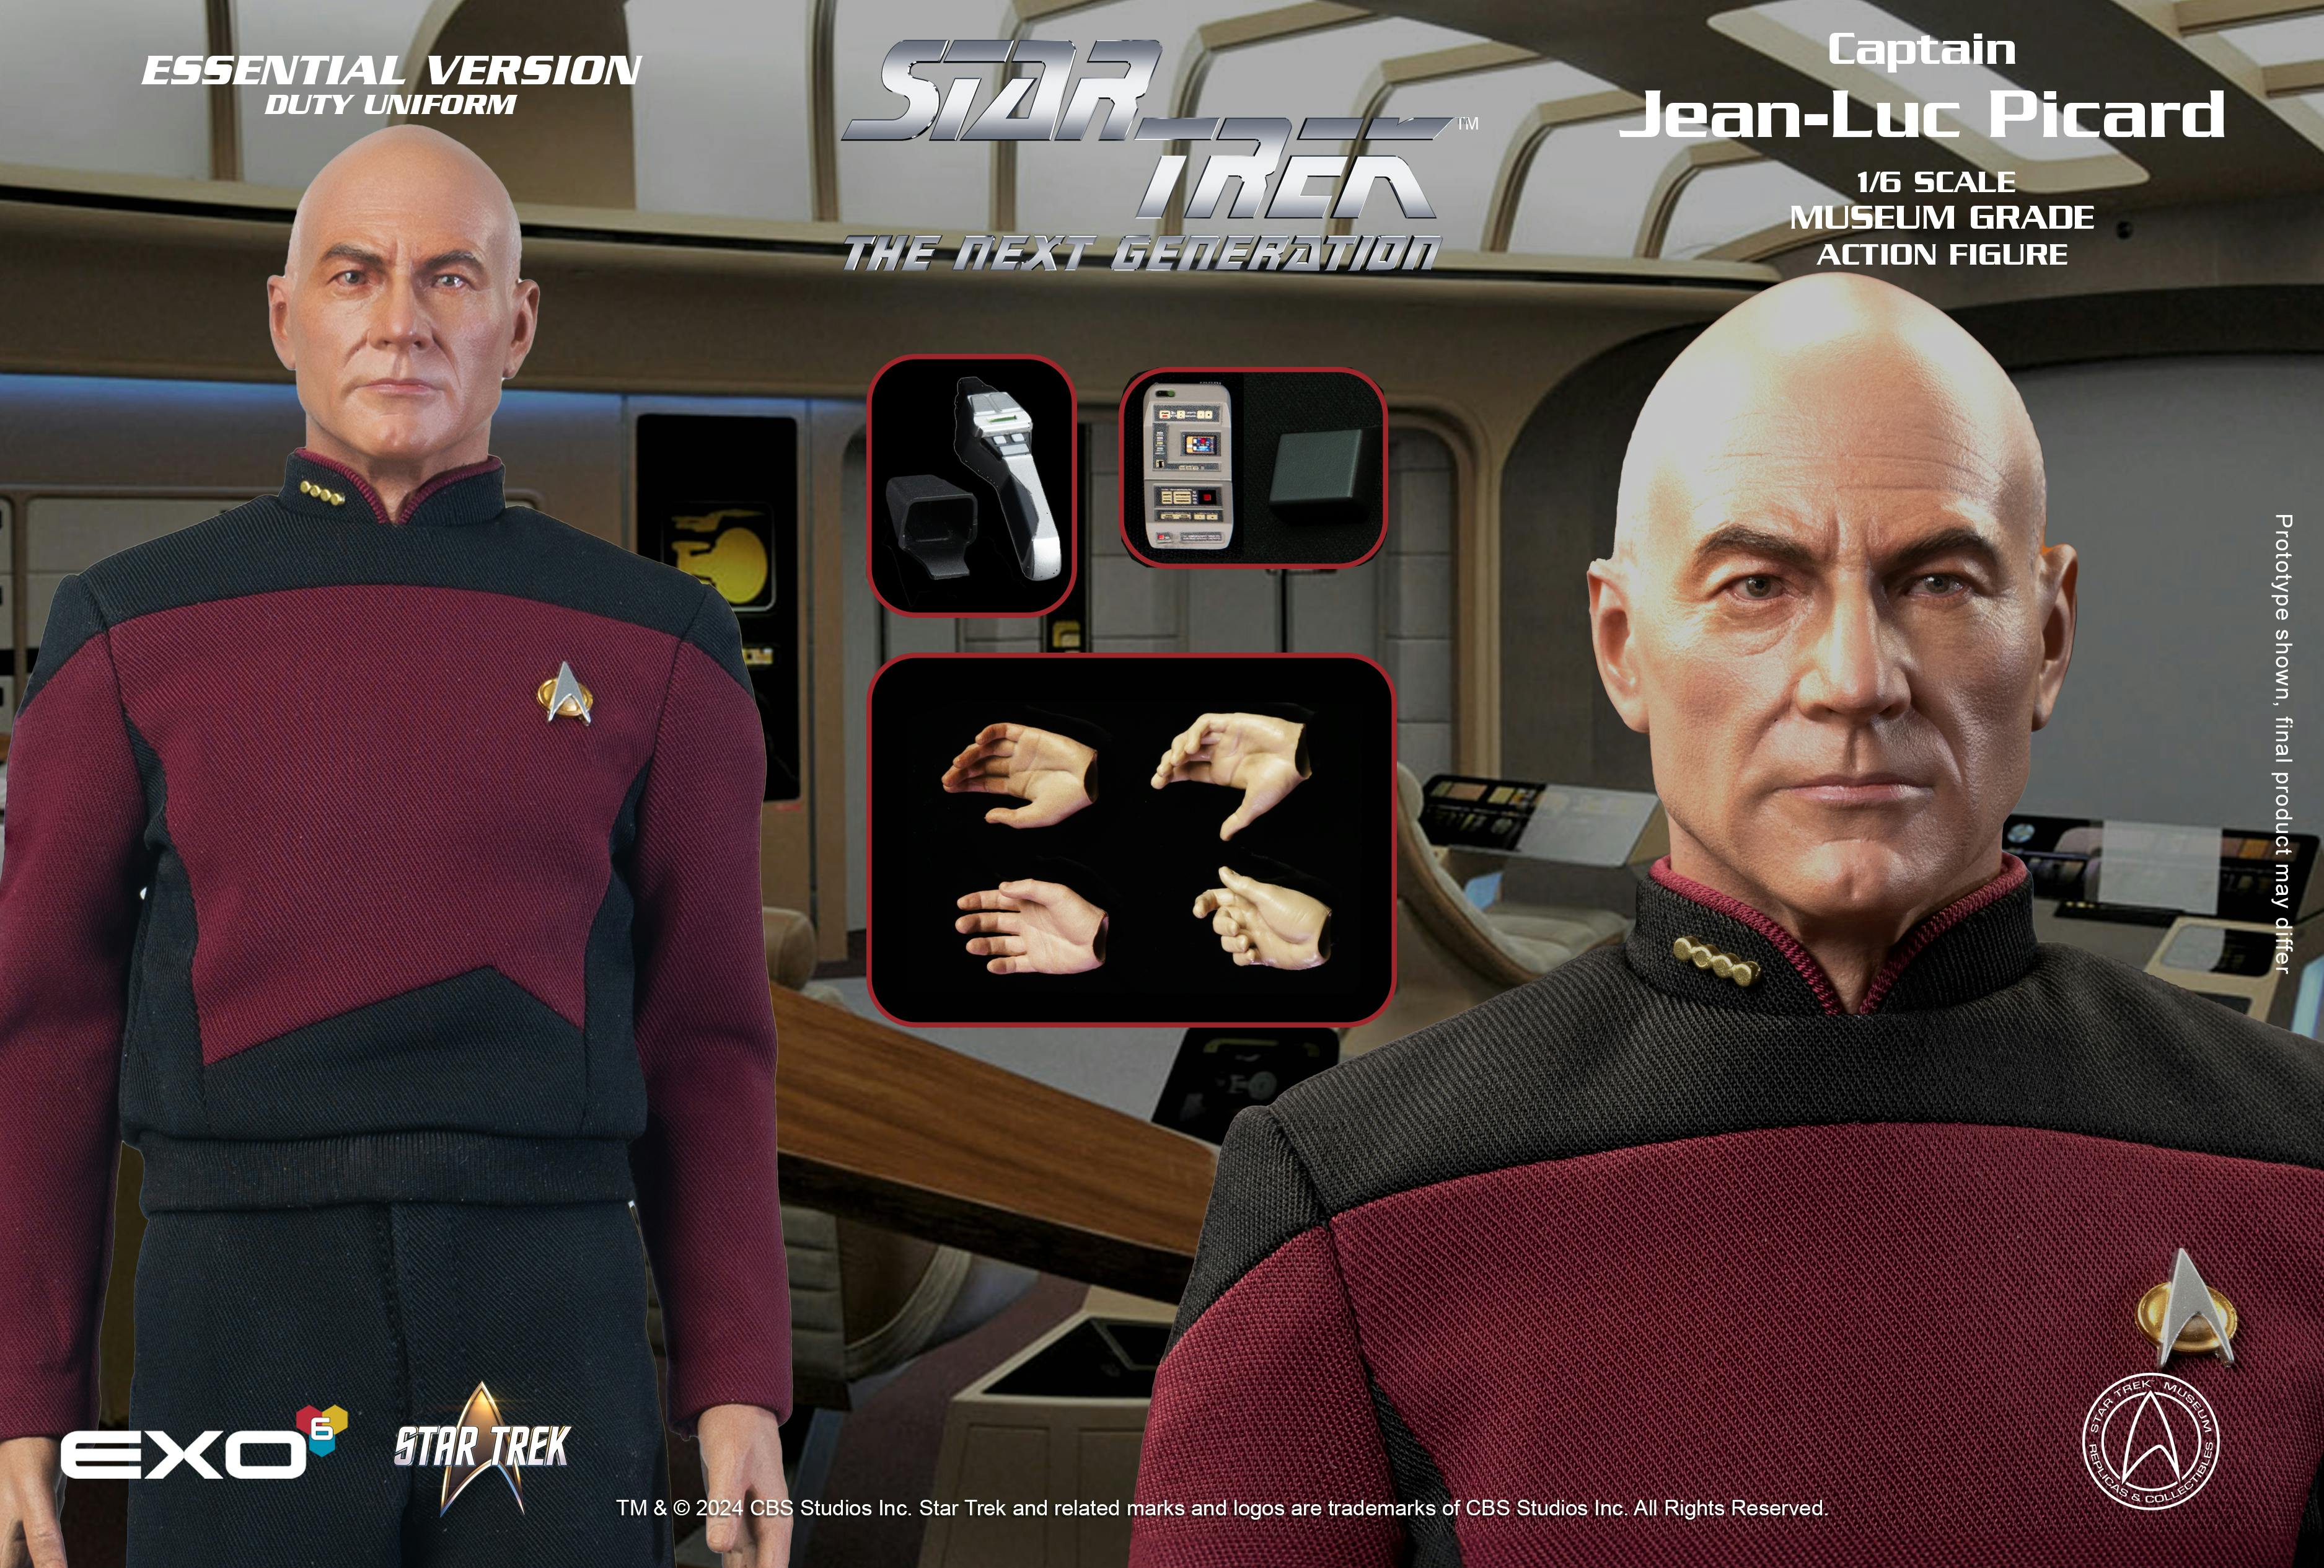 EXO-6 Star Trek: The Next Generation Jean-Luc Picard Essential Version of the figure with all its offerings